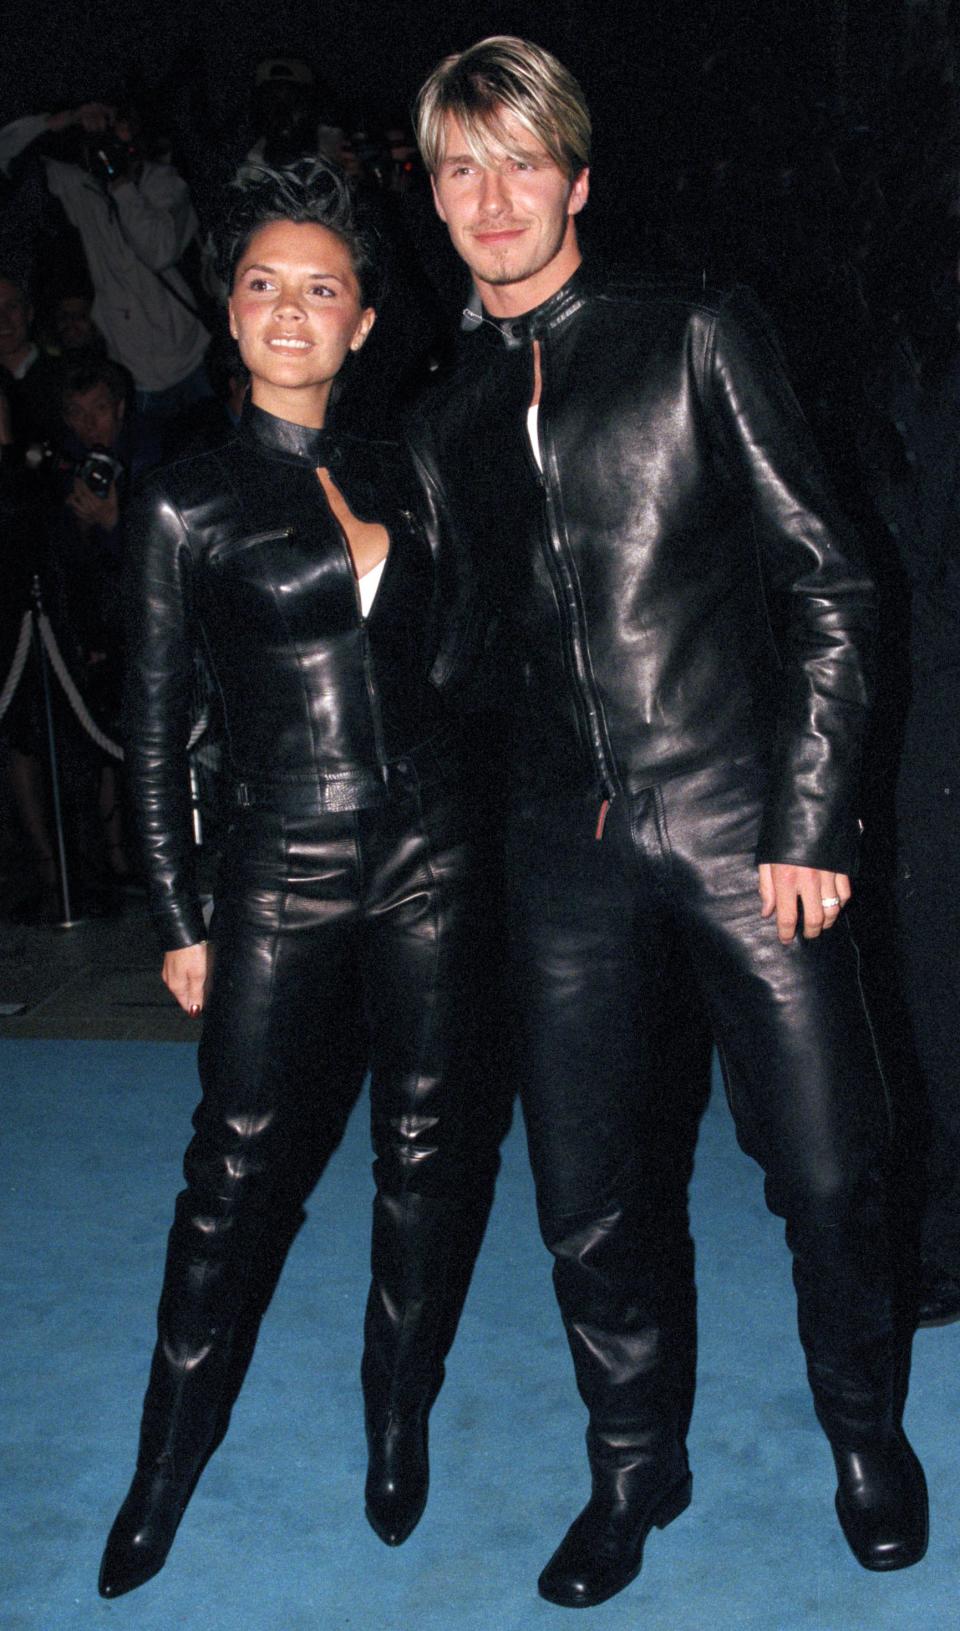 The couple, who married in 1999, are no stranger to twinning outfits. (Getty Images)